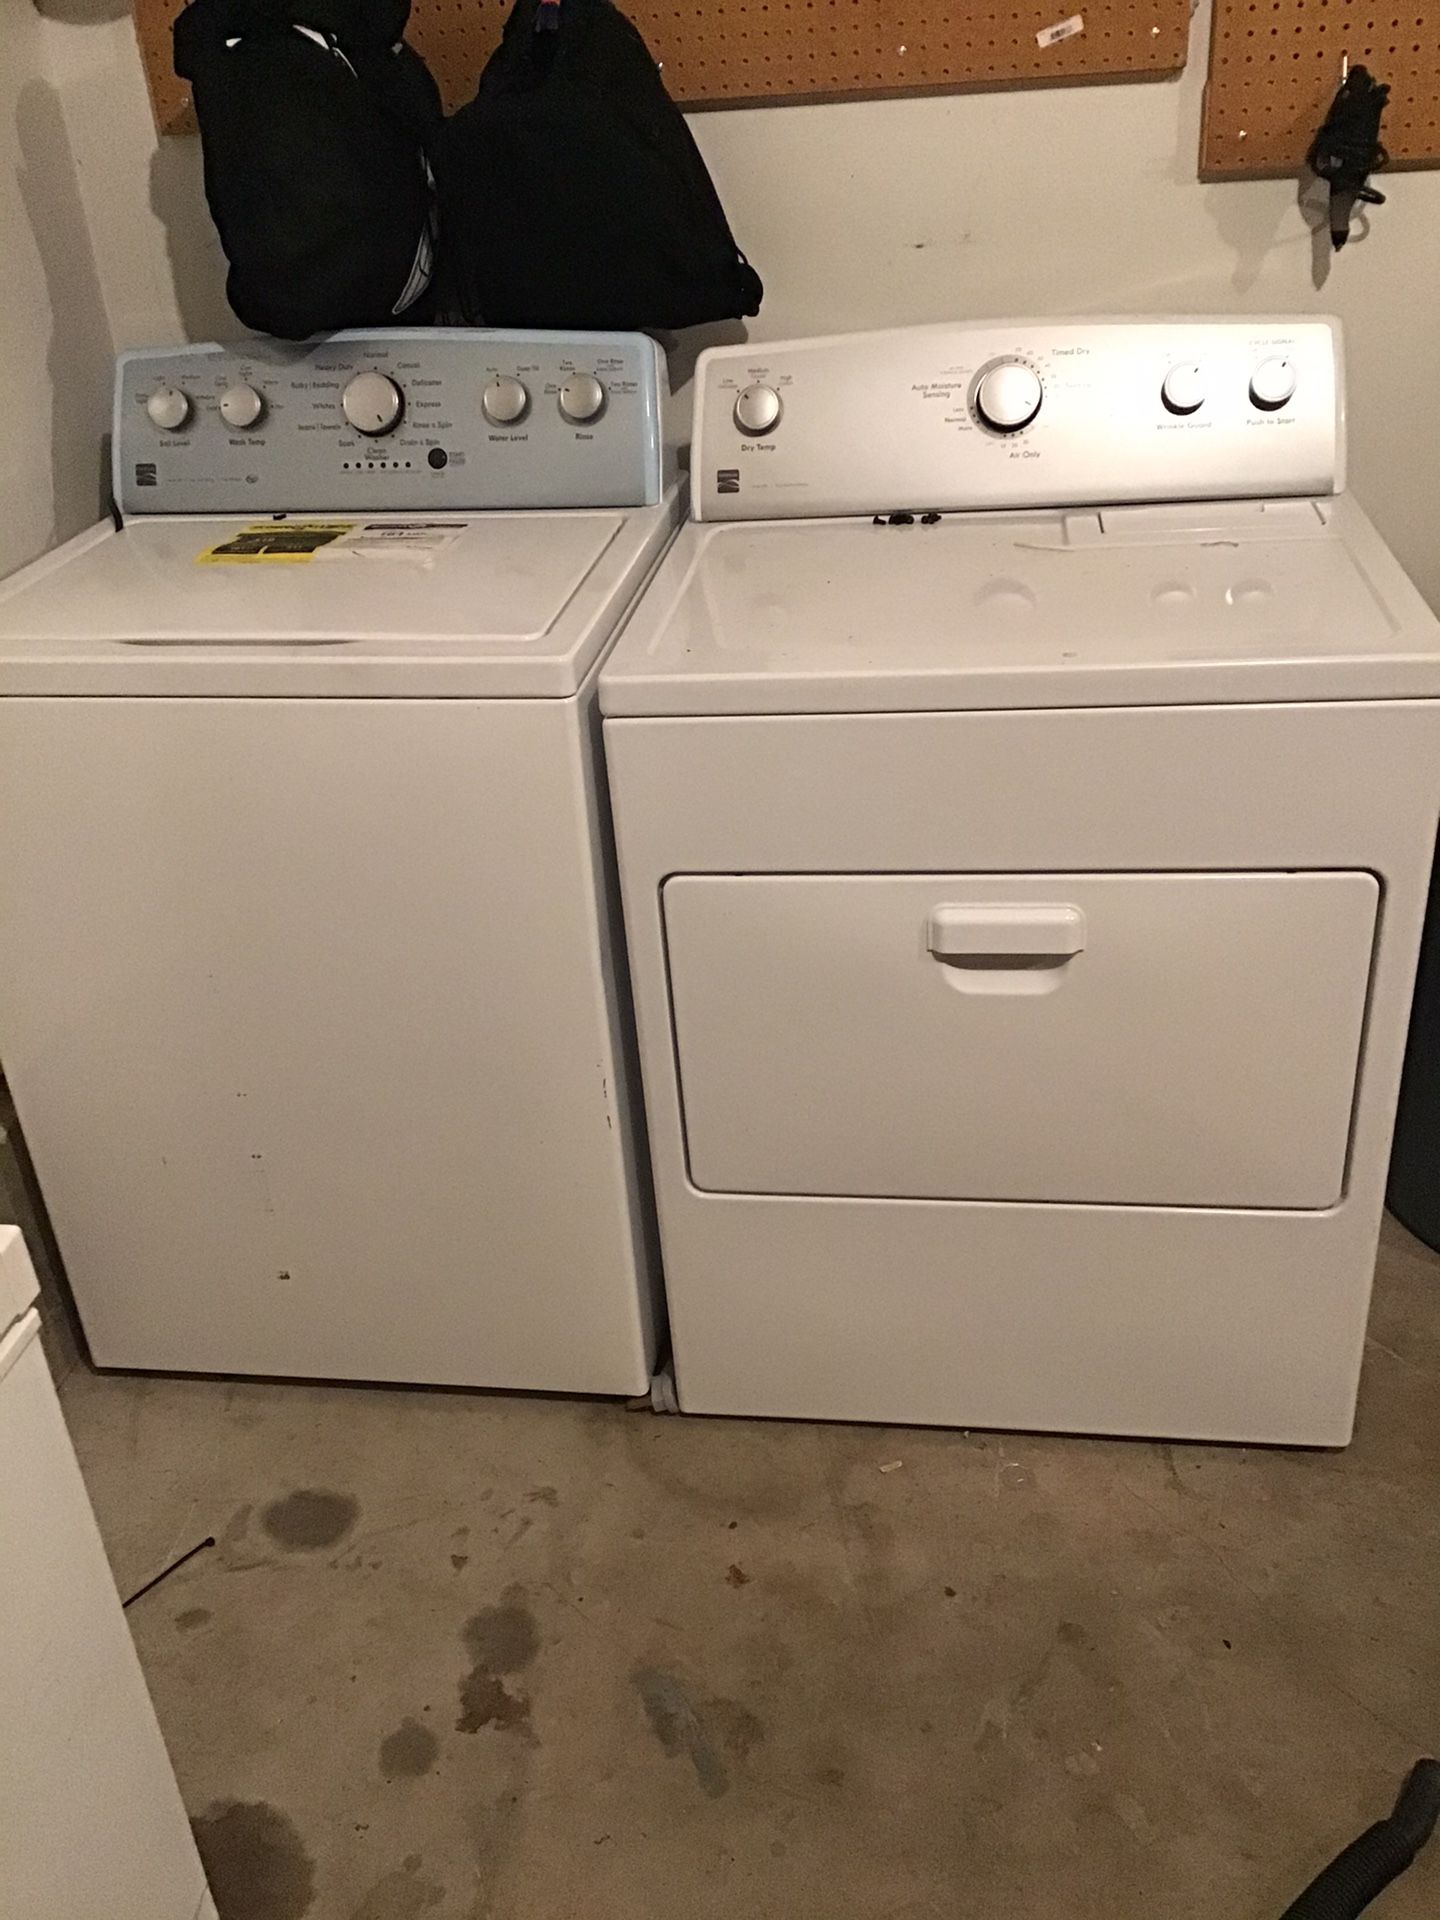 Kenmore washer and dryer set-pending may have found a good for these puppies...